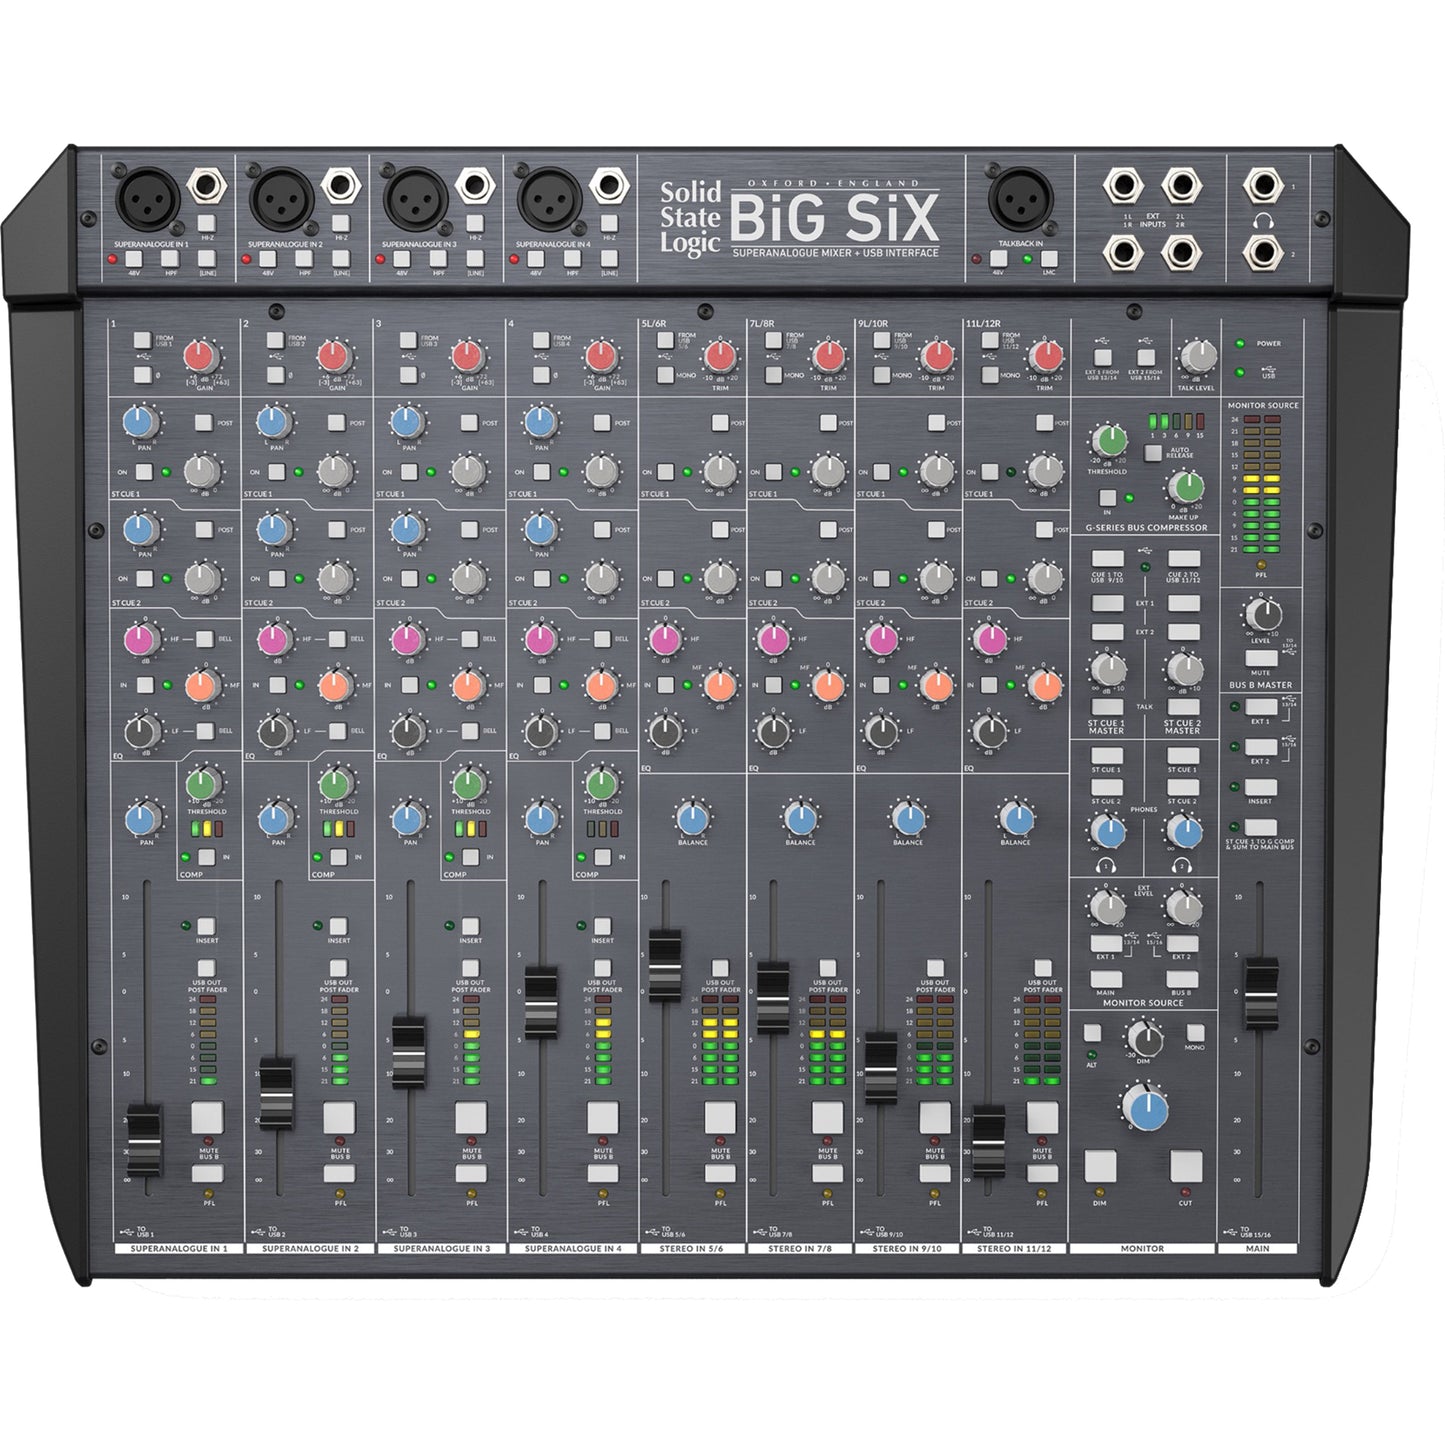 Solid State Logic BiG SiX Mixer and Audio Interface